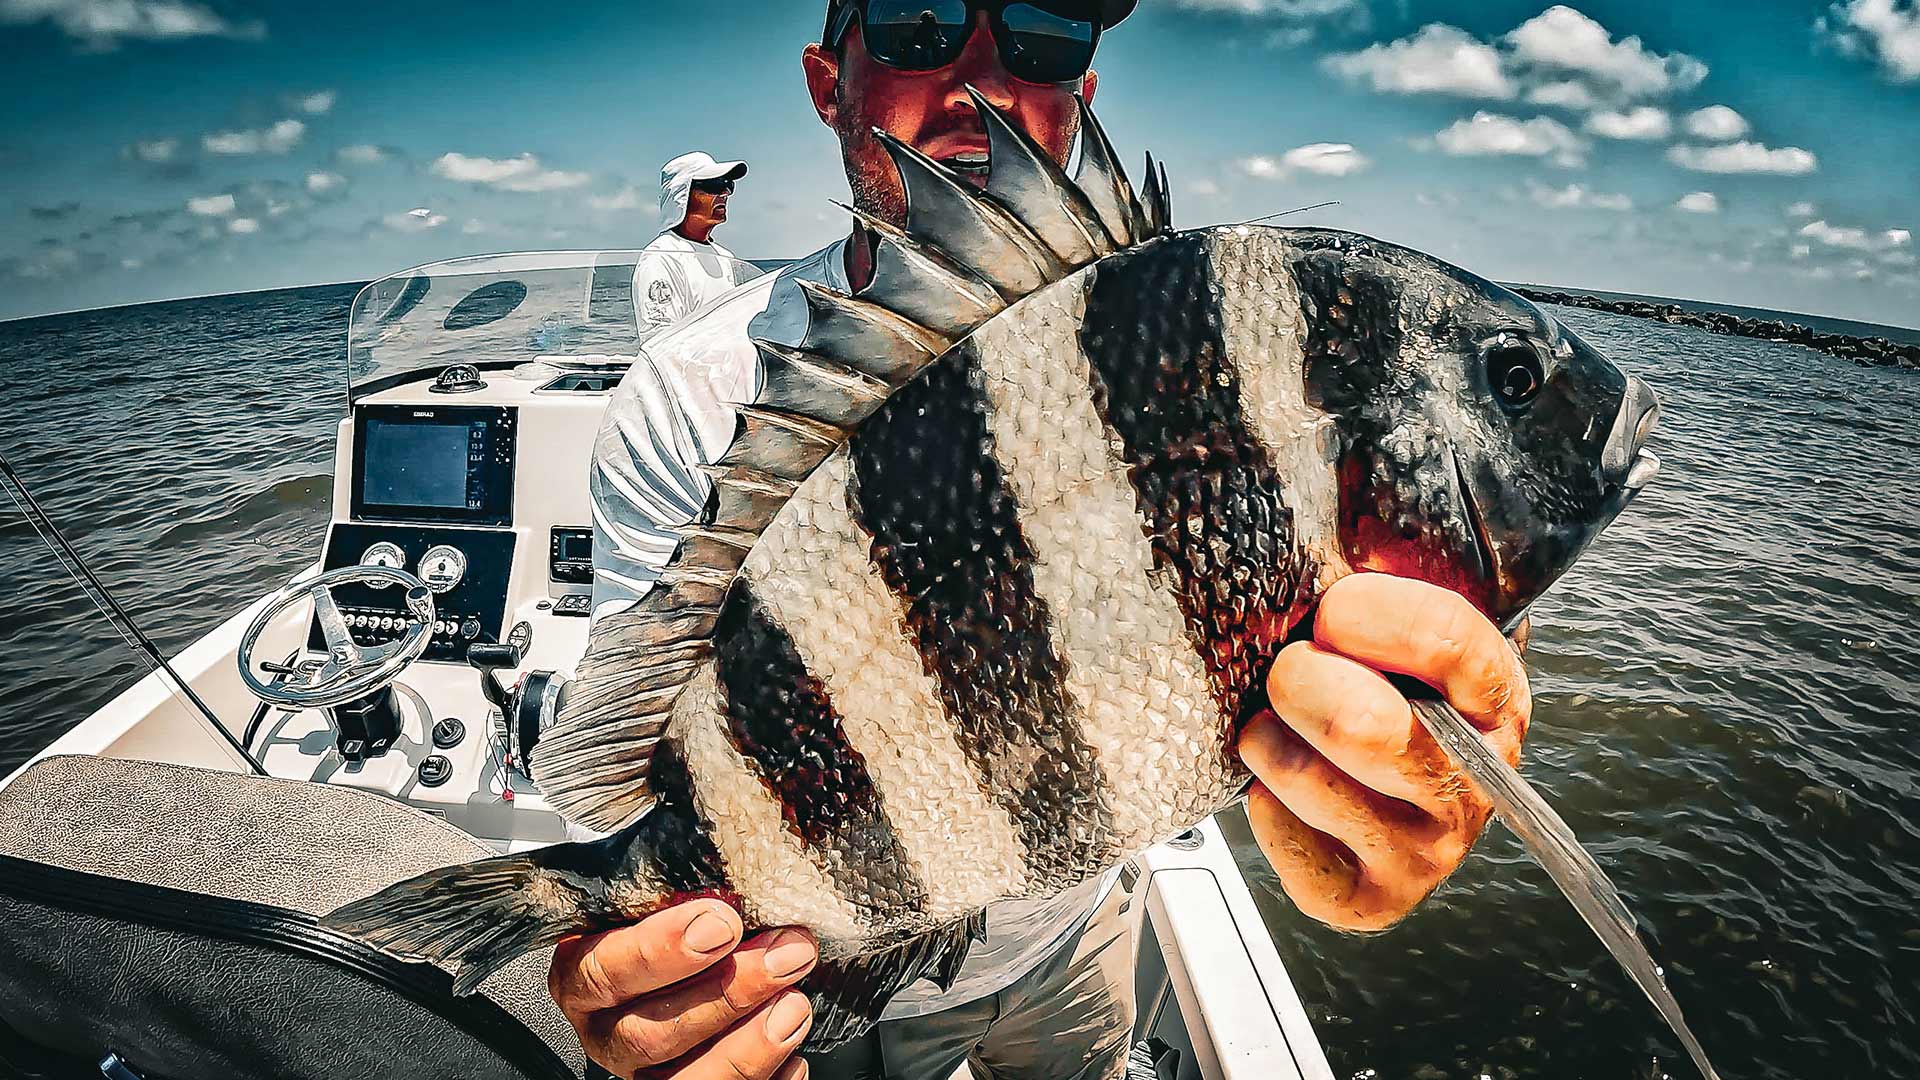 Catching Sheepshead in the Gulf of Mexico